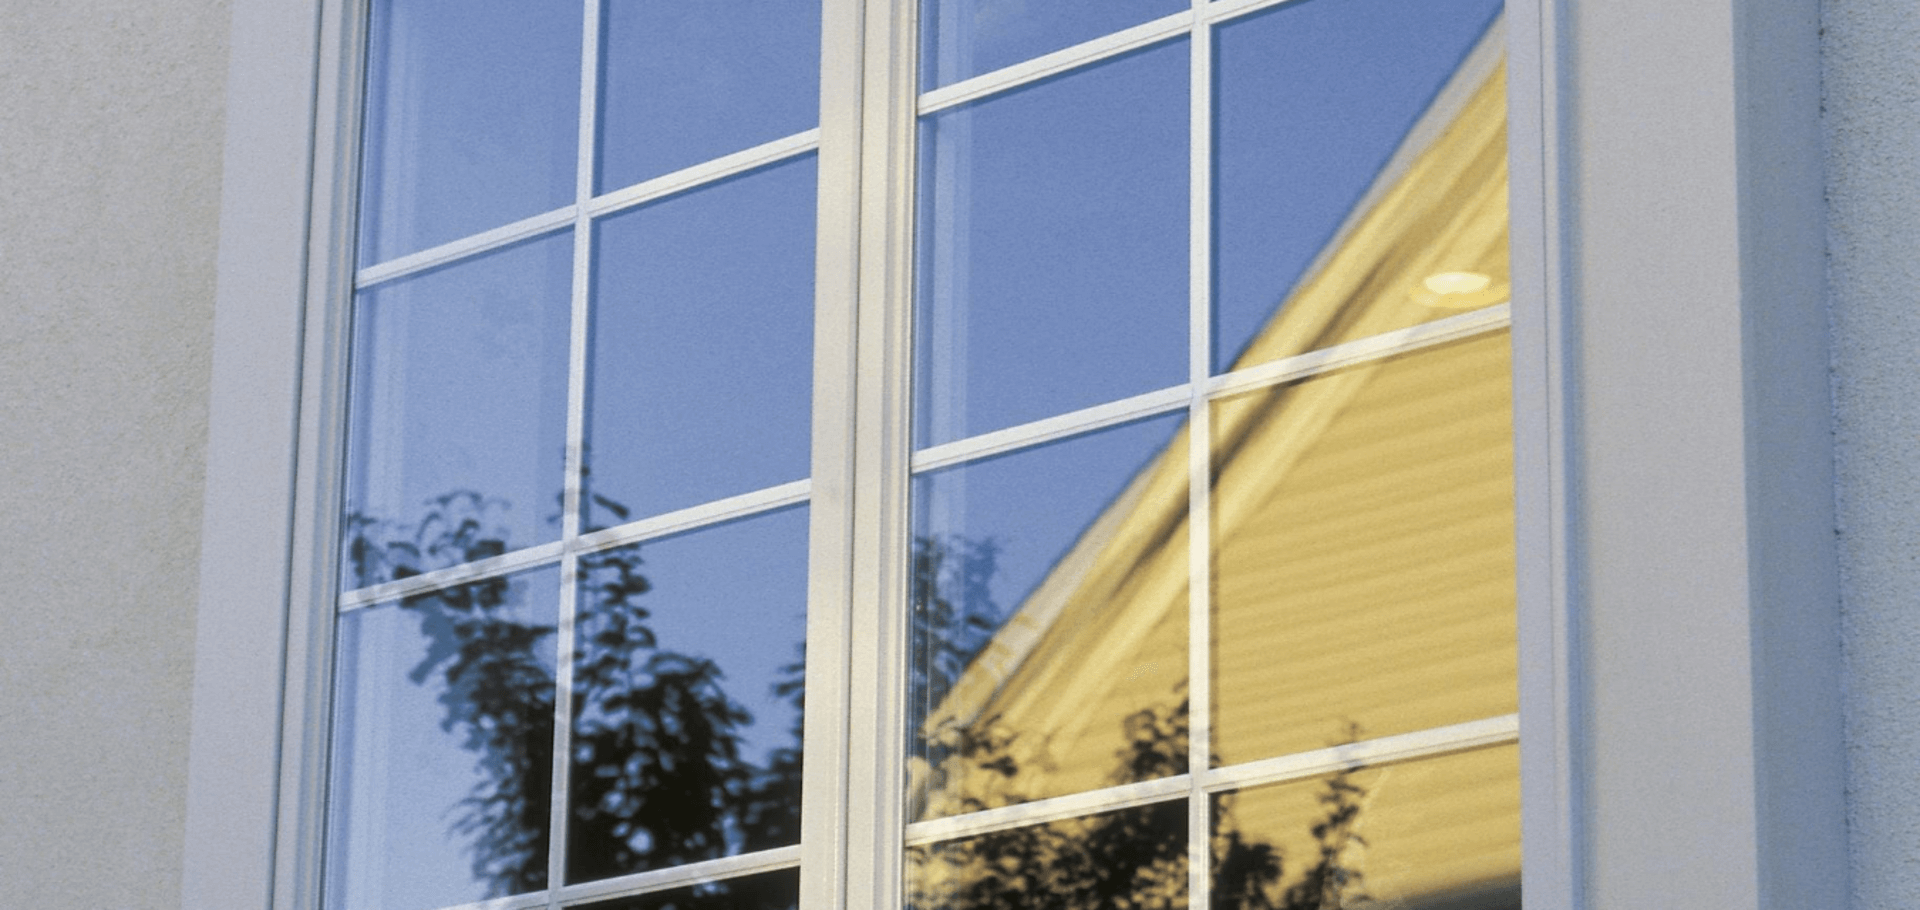 What happens if you don’t wash your windows?